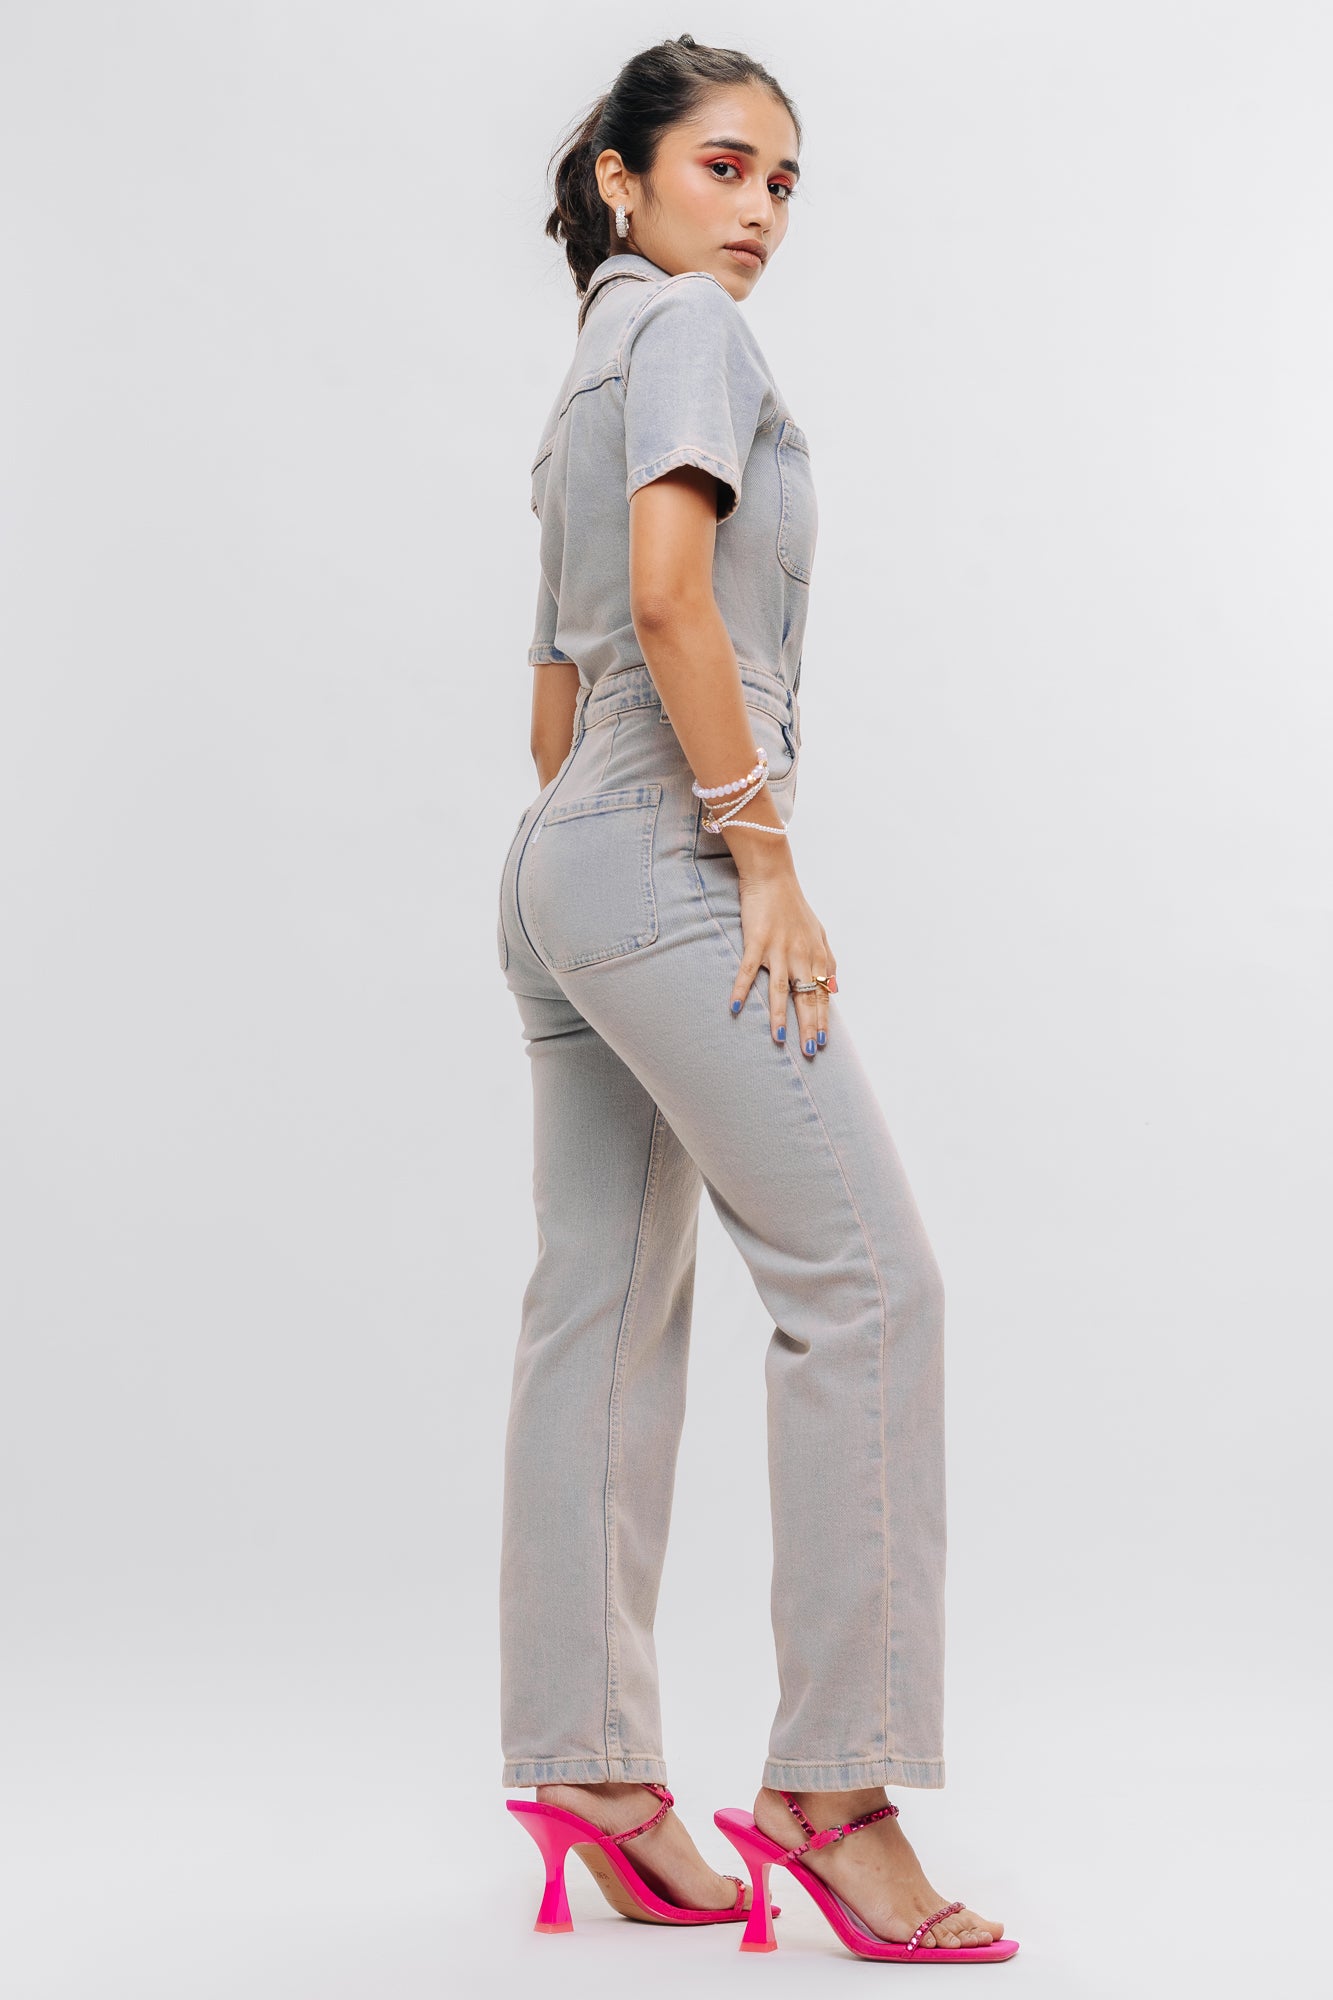 Mildsown SUNSIOM New Casual Womens Bodycon Jumpsuit Jeans India